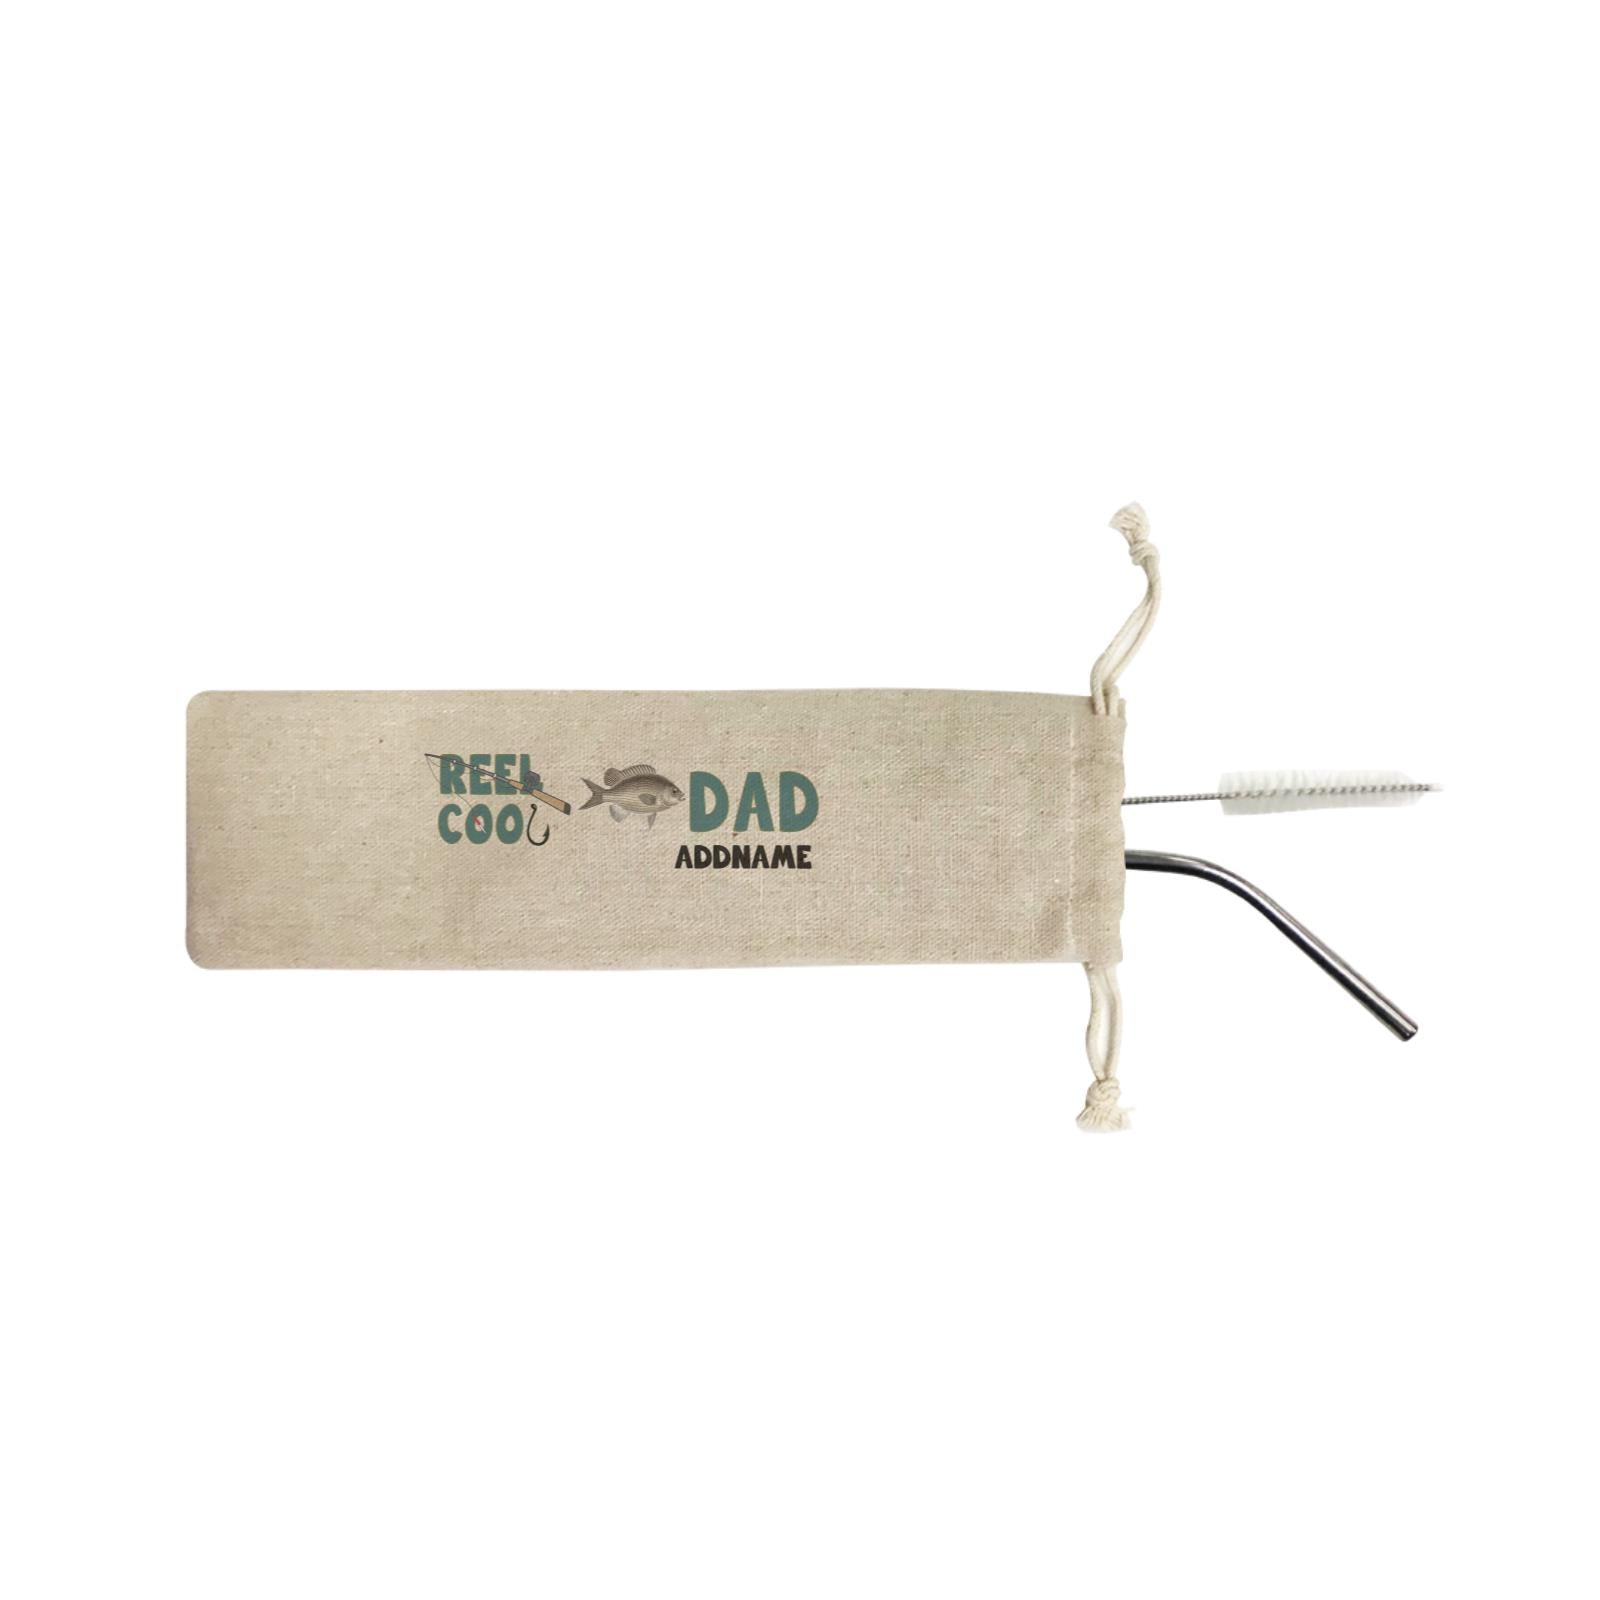 Reel Cool Dad Addname SB 2-in-1 Stainless Steel Straw Set In a Satchel